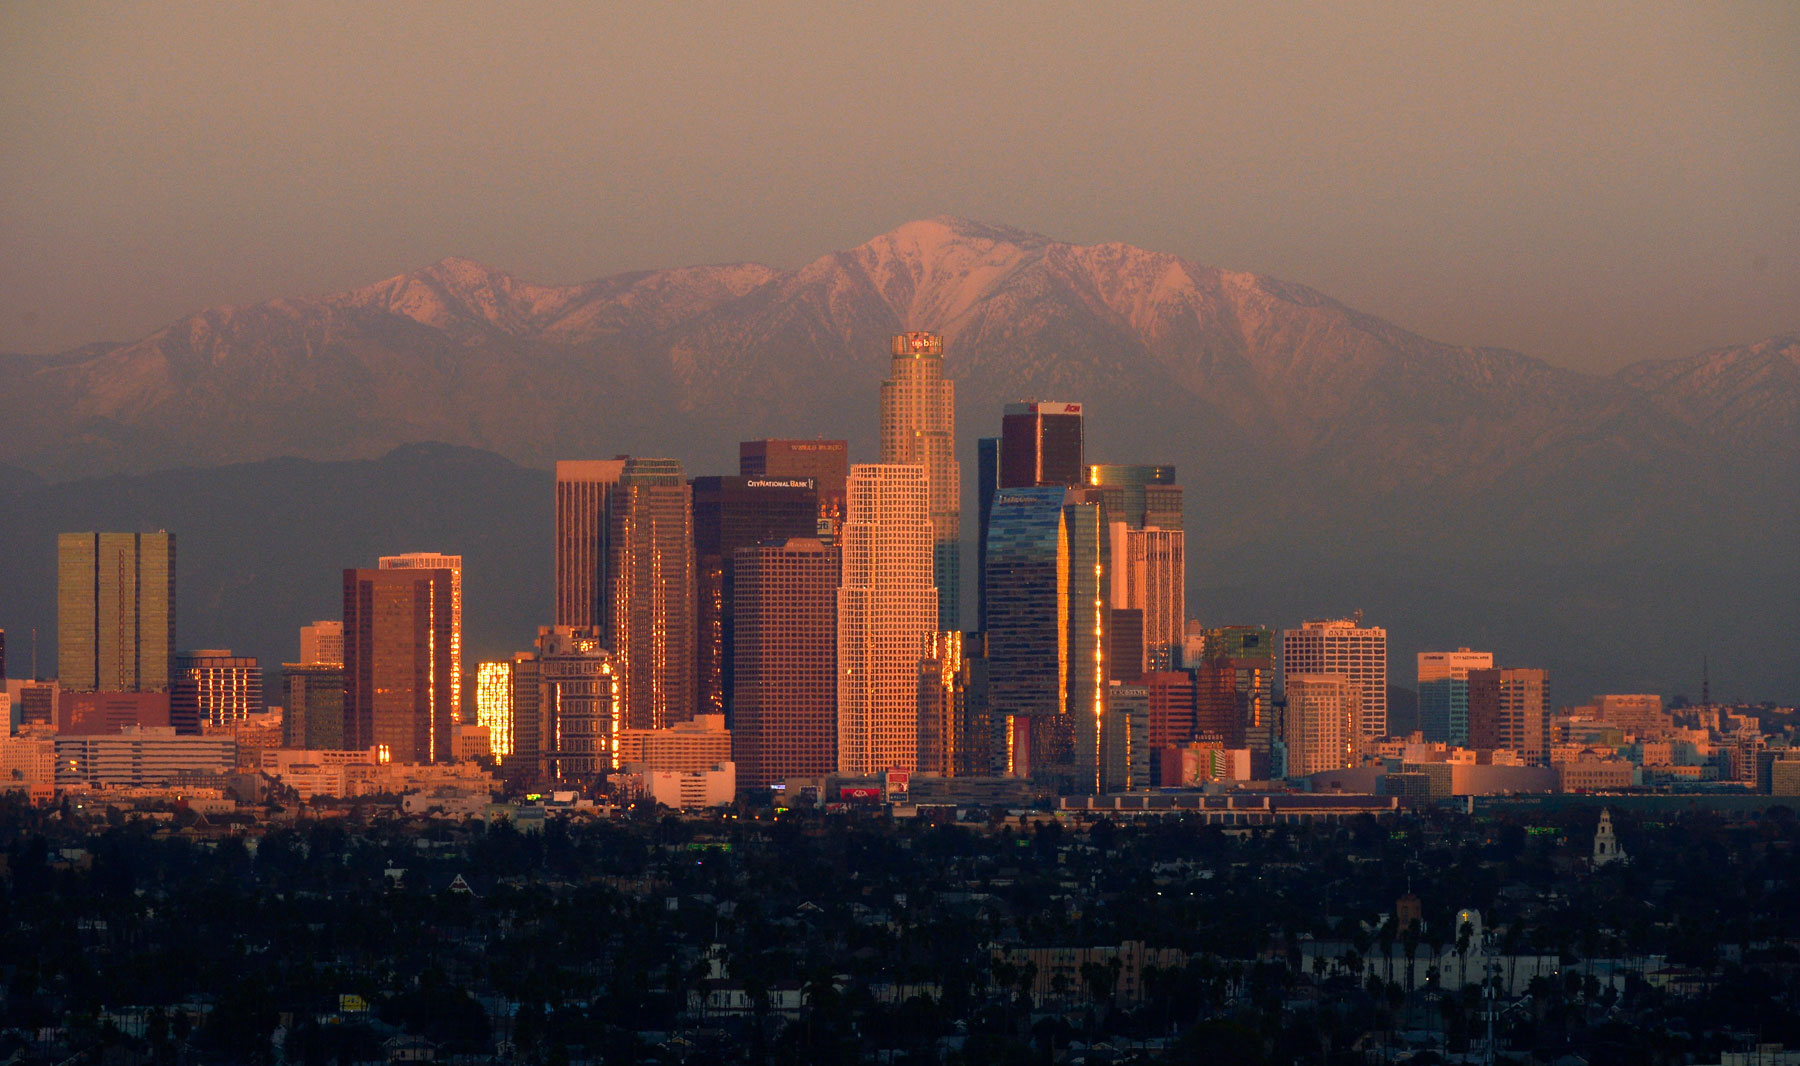 The sun sets over downtown Los Angeles skyline with the snow covered mountains behind it, Thursday, Jan. 3, 2013, in Los Angeles. (AP Photo/Mark J. Terrill)